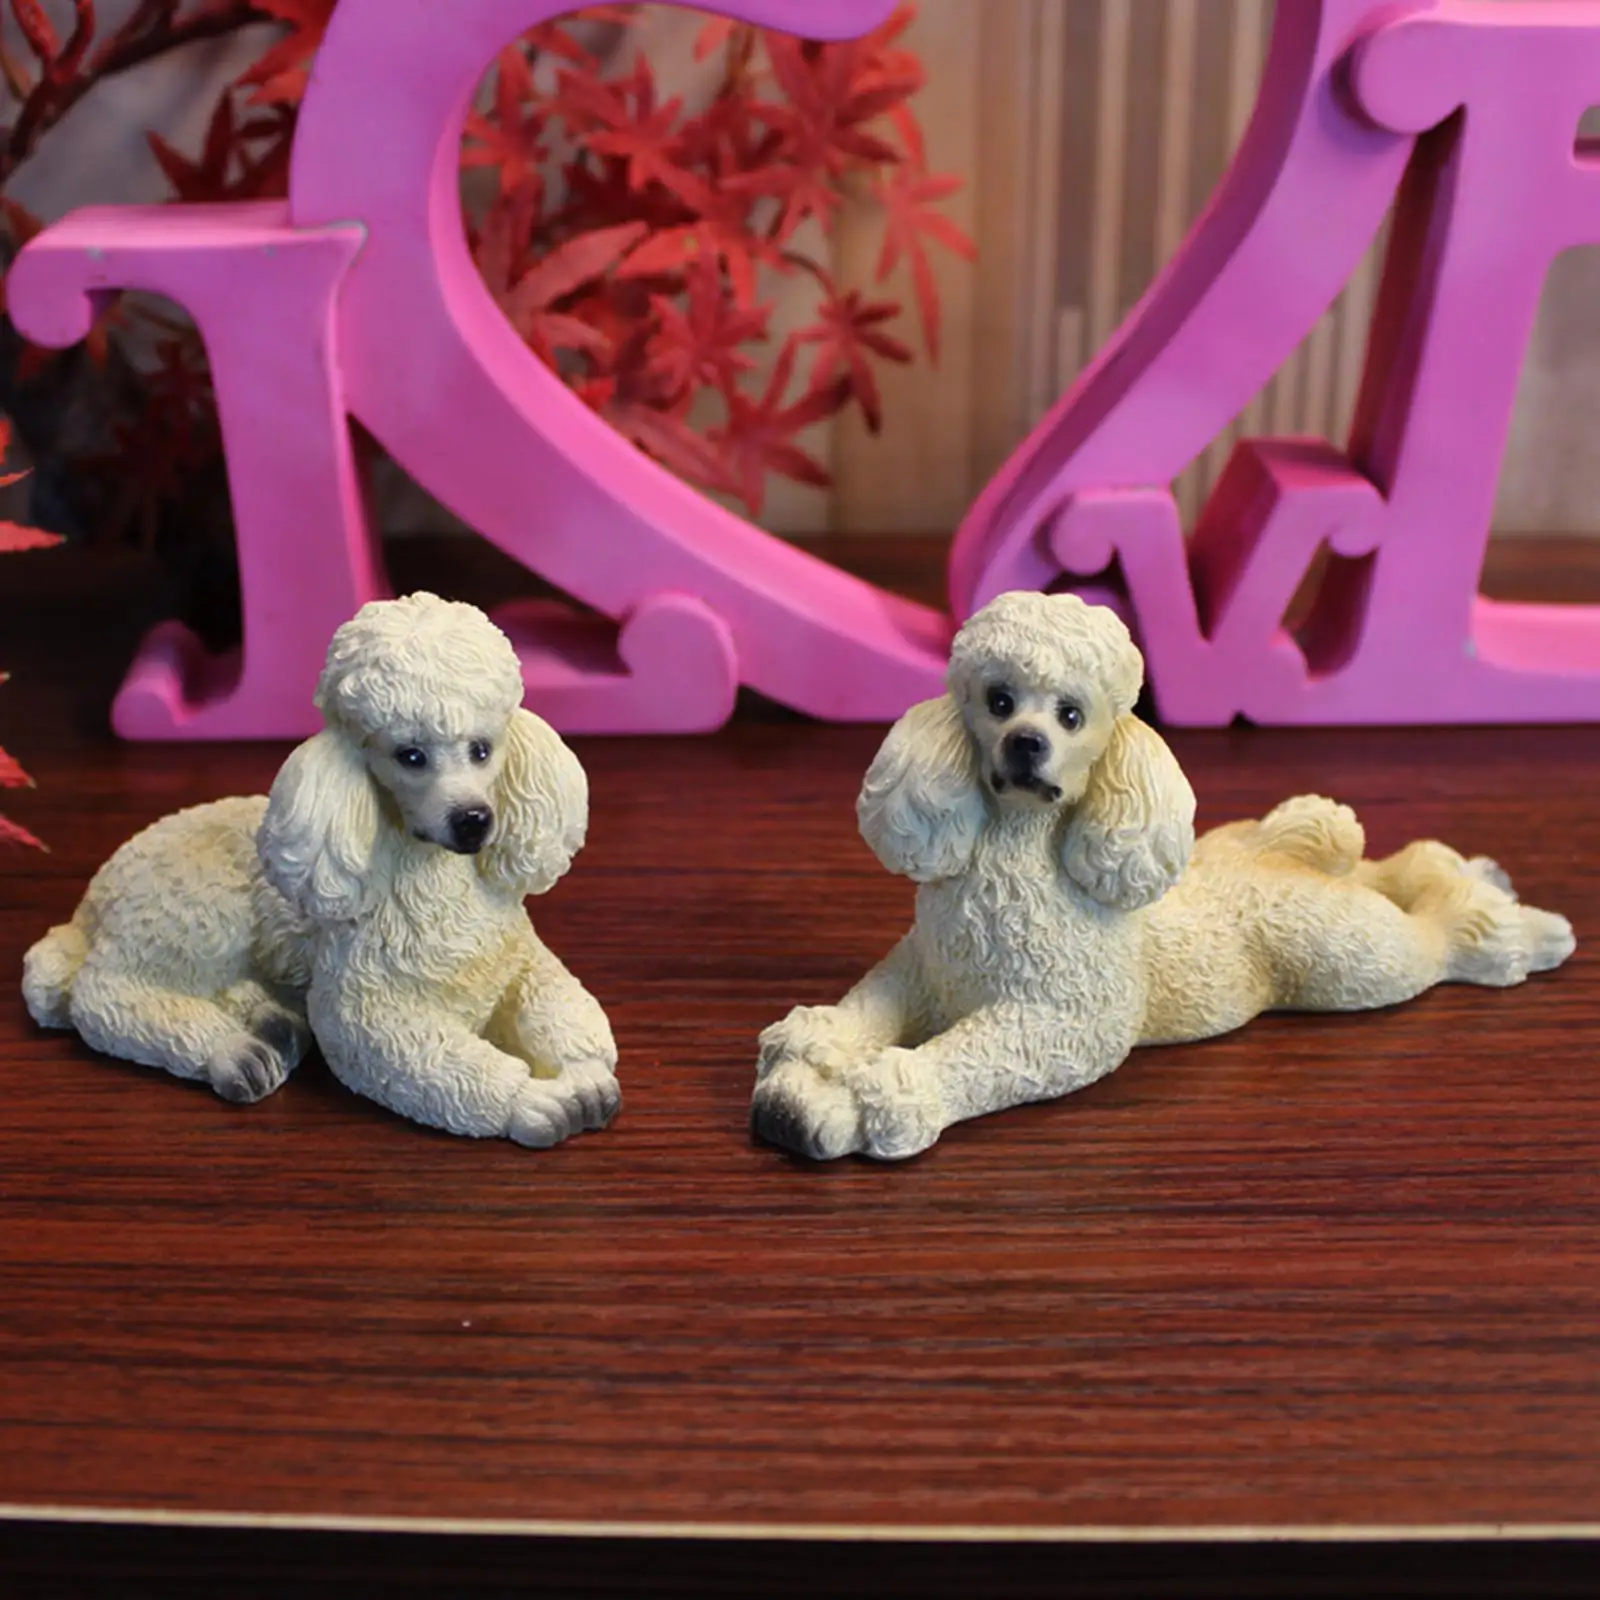 2x Creative Dogs Sculpture Art Crafts Collectable Cute Toy Poodle Dog Statue Pet